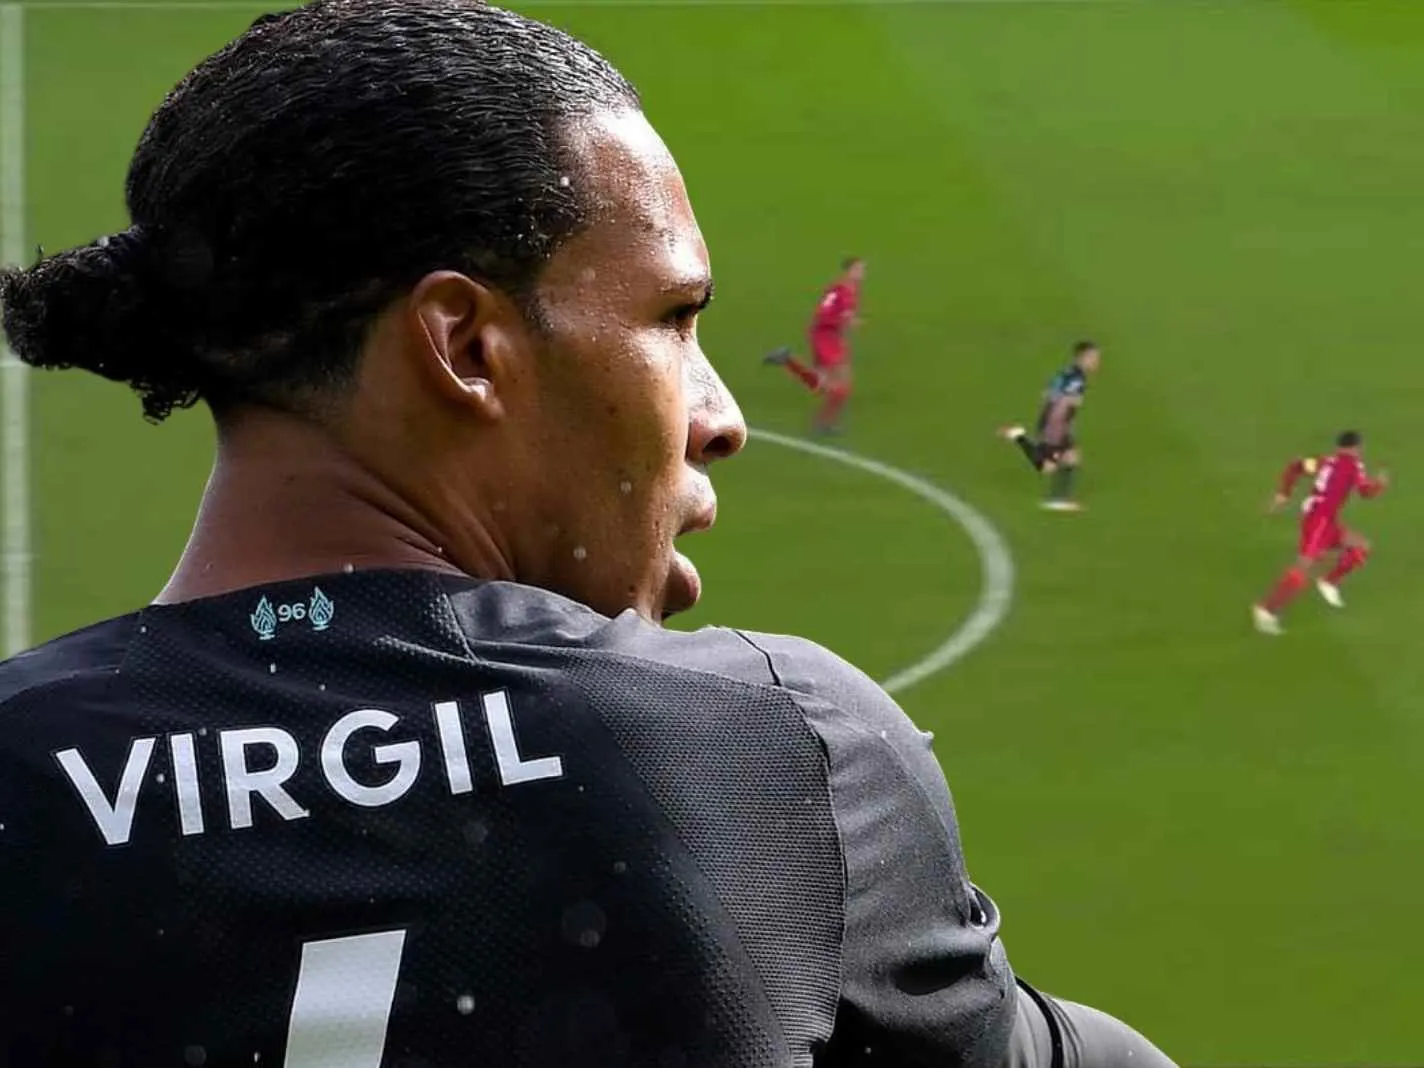 Liverpool fans loved the moment when Lautaro Martinez gave up on a 1v1 duel as soon as he saw Virgil van Dijk